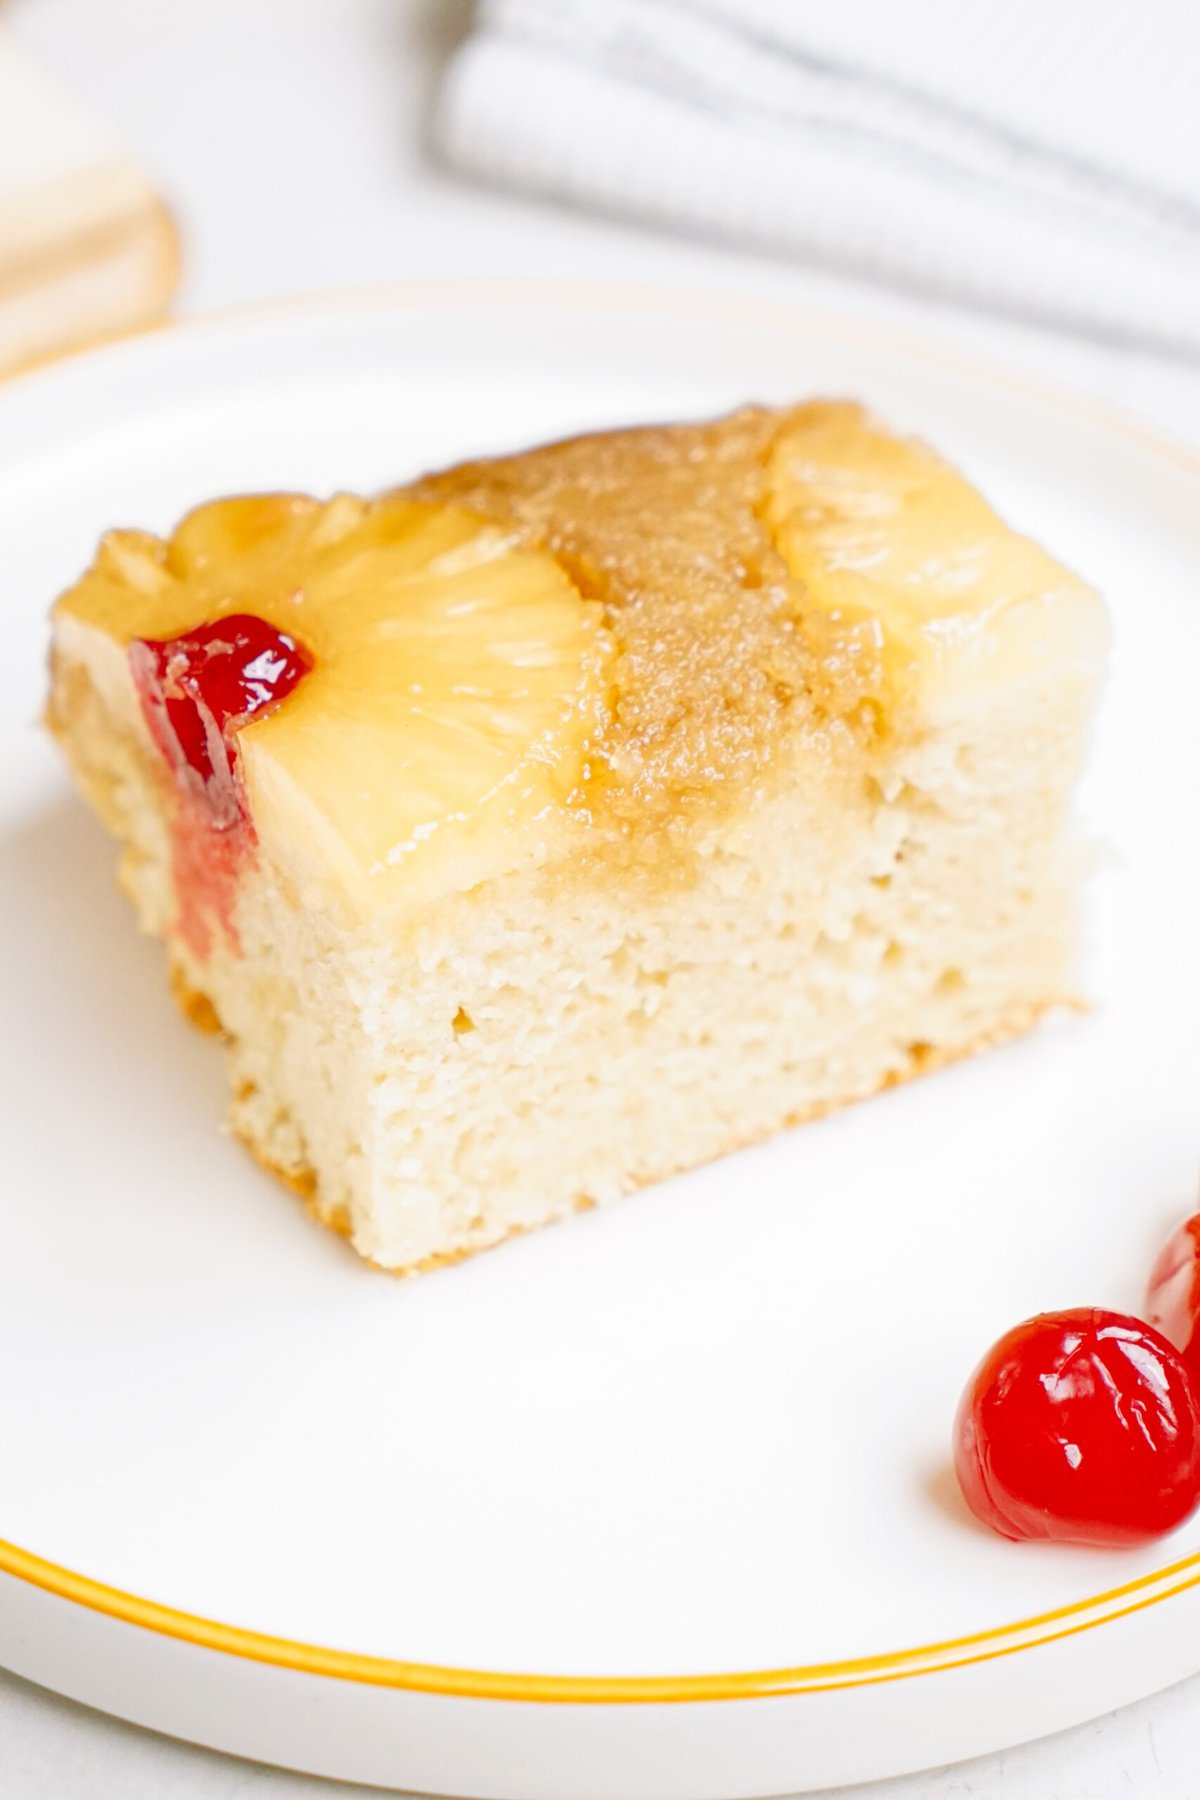 A slice of pineapple upside-down cake on a white plate with a cherry garnish.